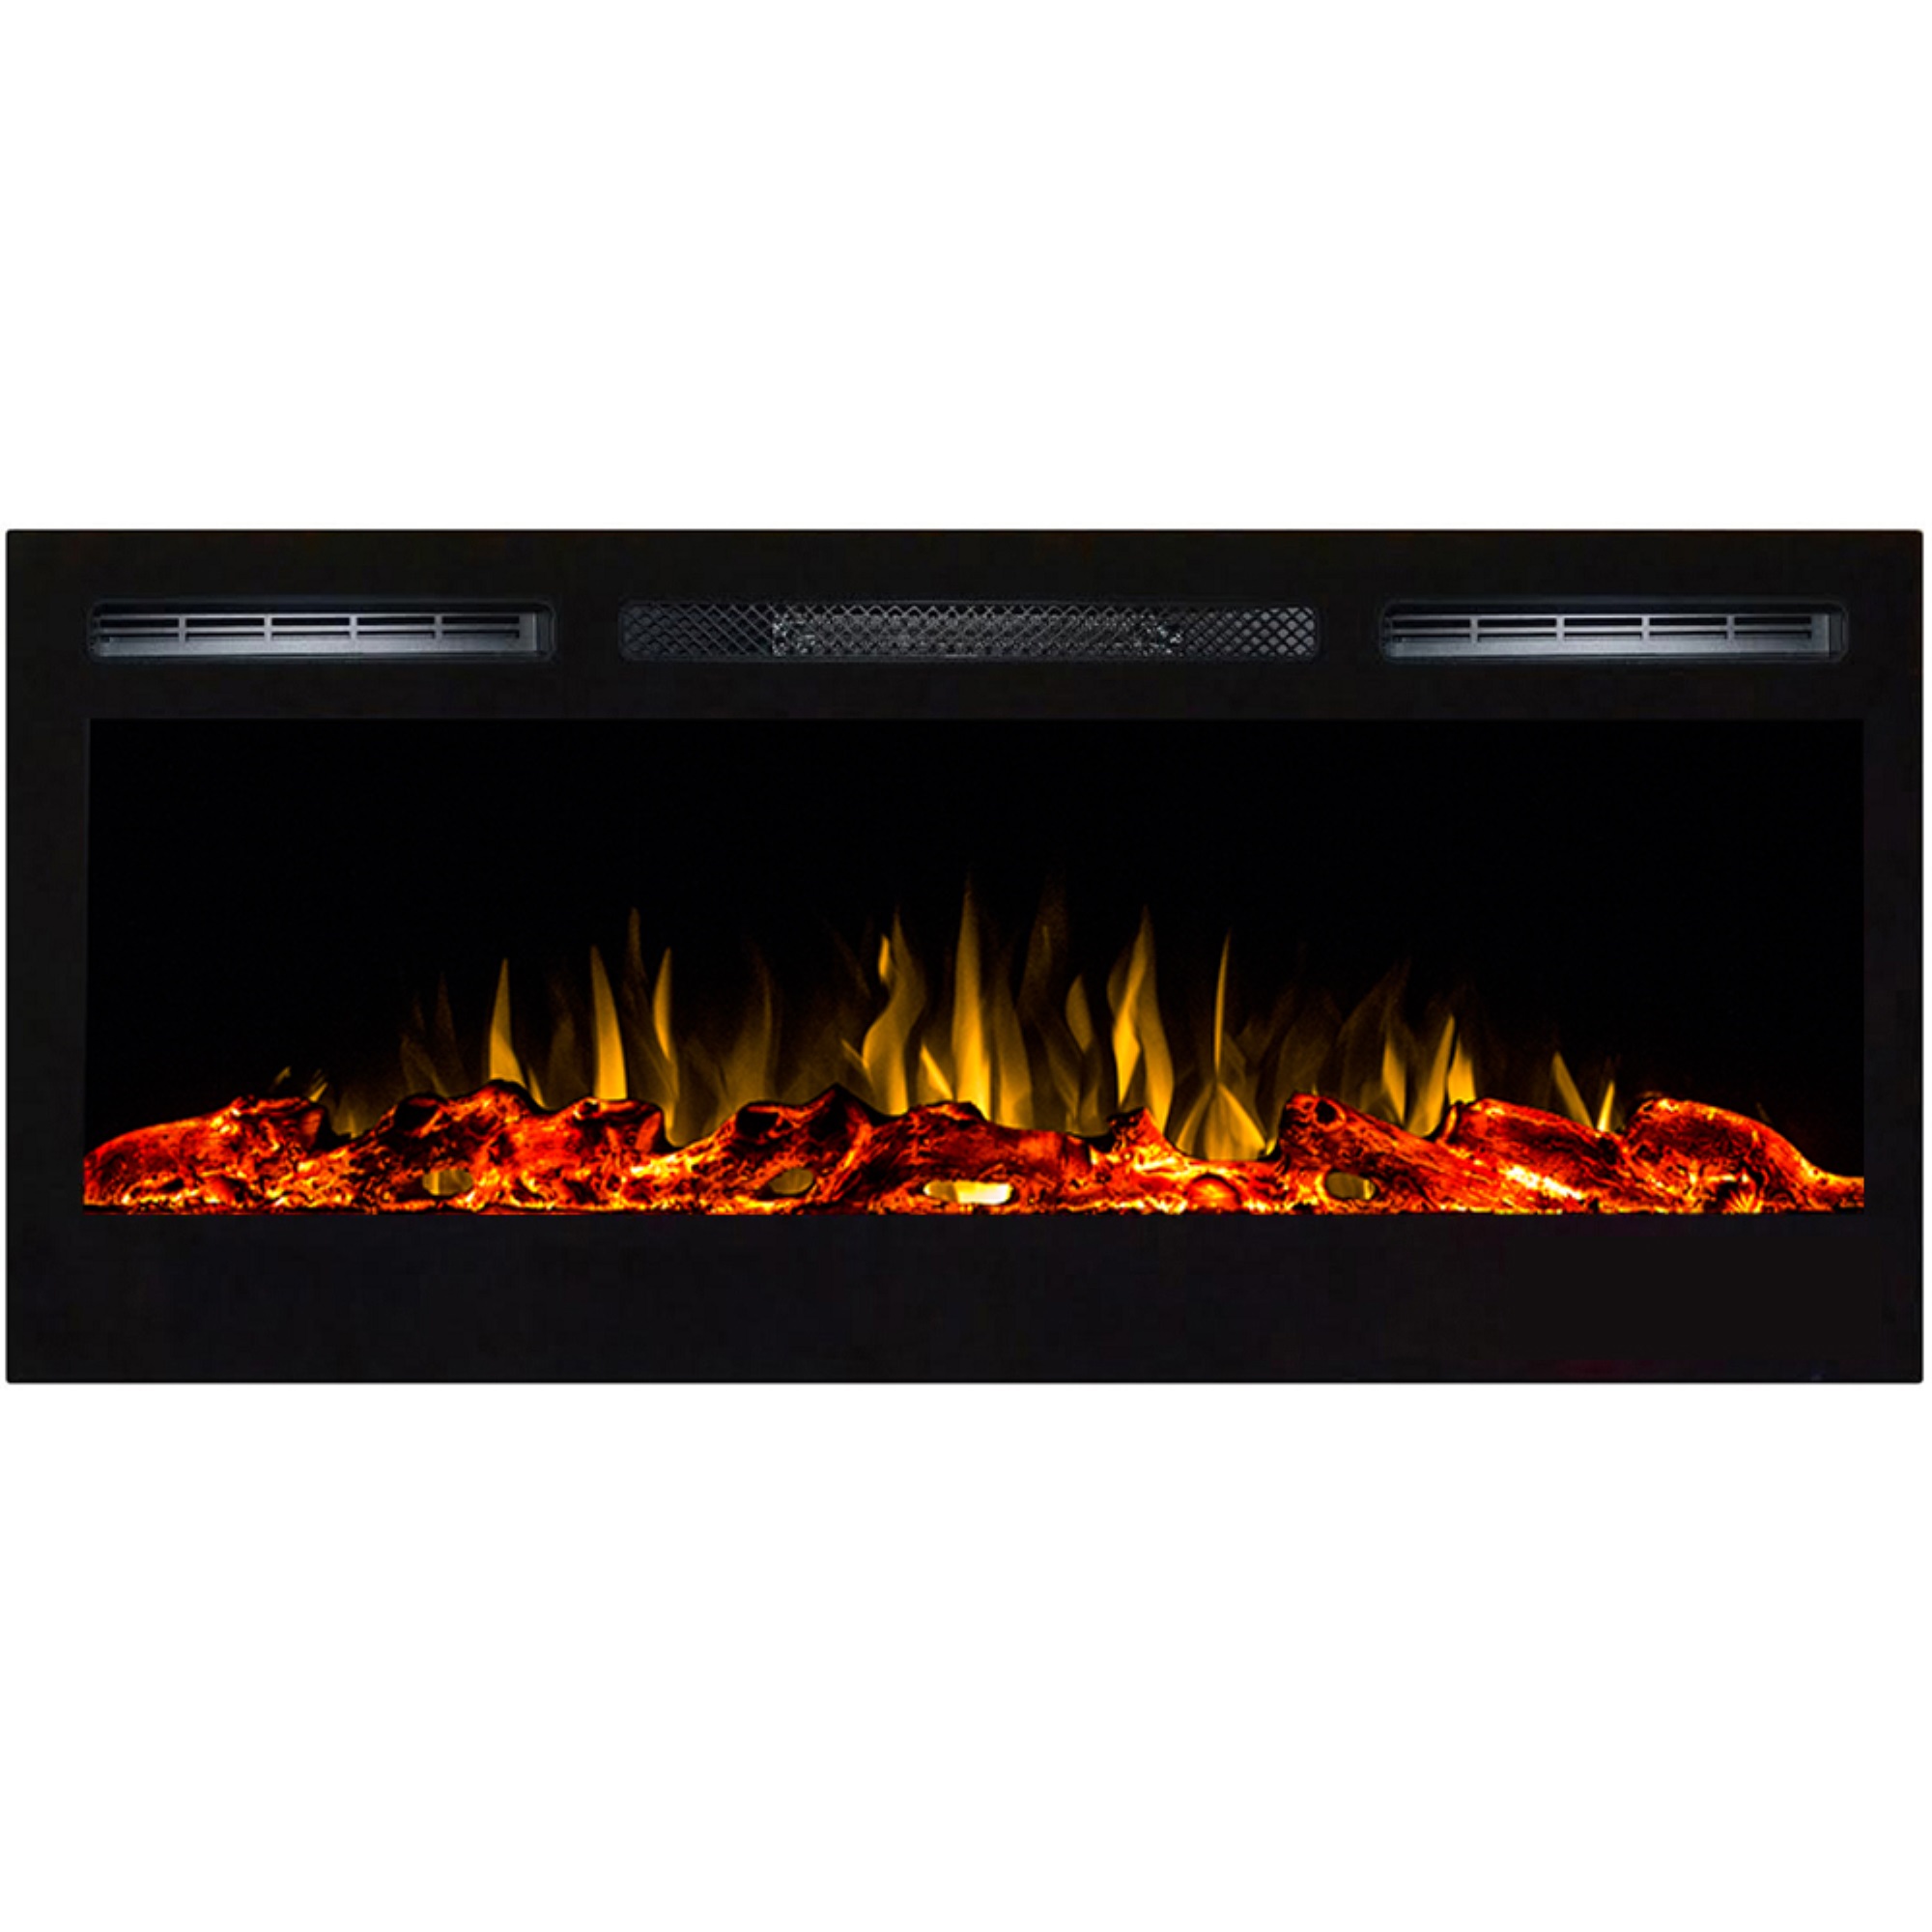 gibson Living LW2035WL-gL 36 in Madison Logs Recessed Wall Mounted Electric Fireplace